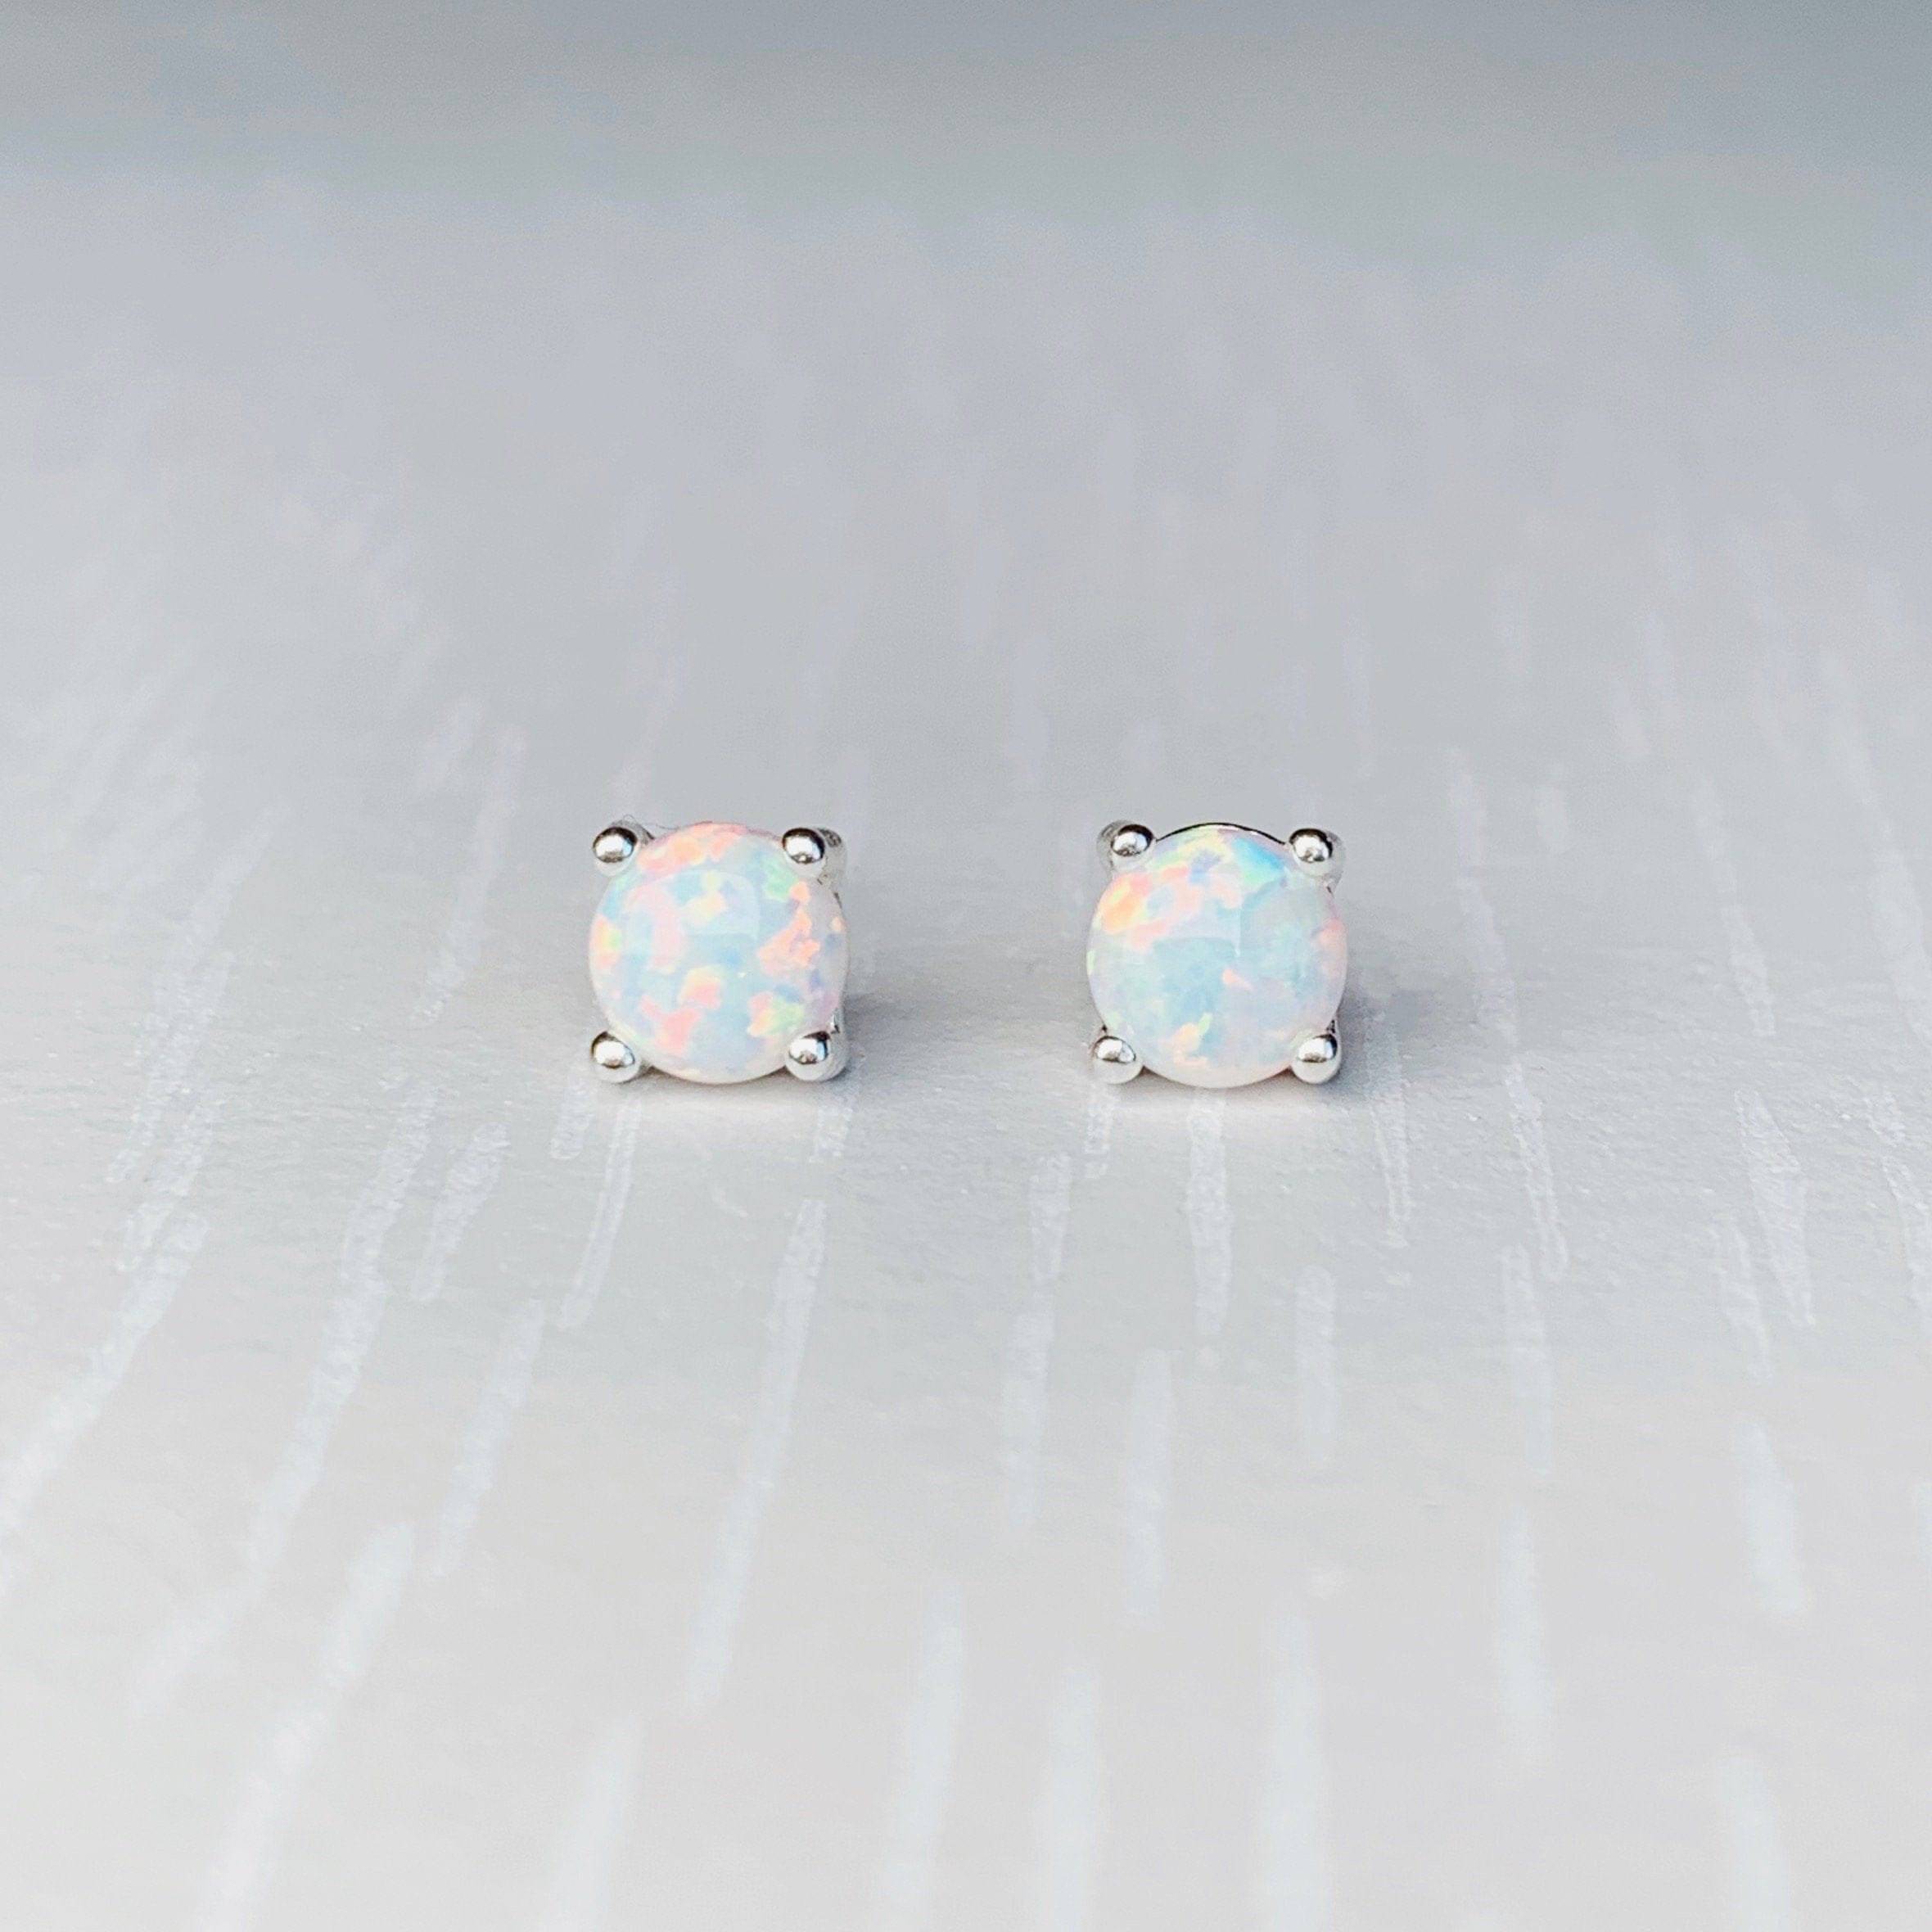 925 Sterling silver stud earrings  with 5mm white Opal stones